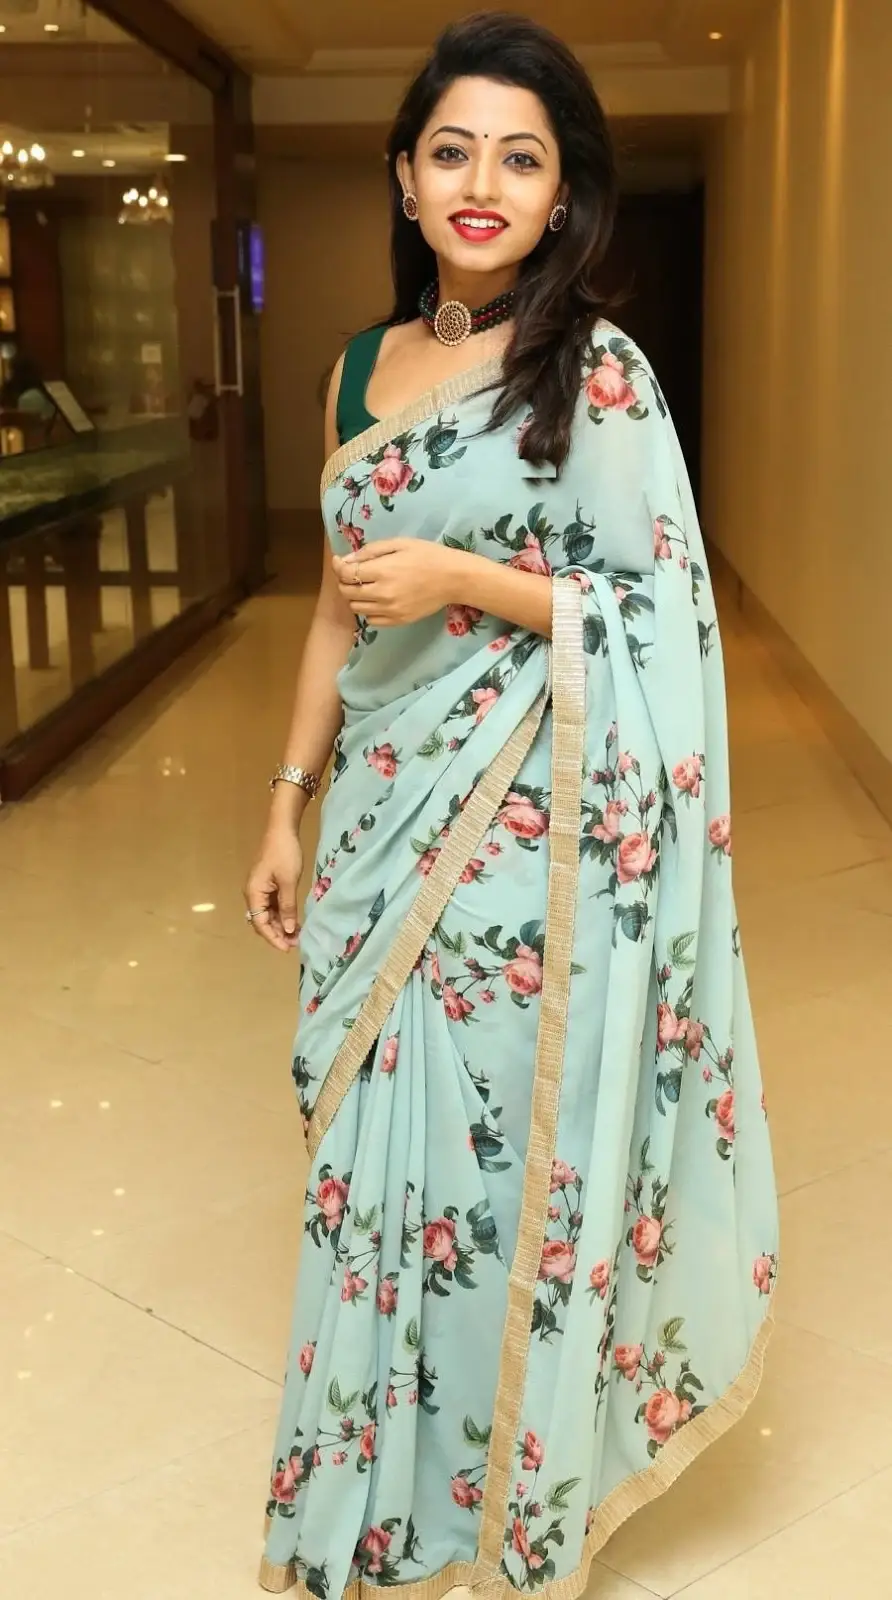 INDIAN TELEVISION ACTRESS NAVYA SWAMY IN BLUE SAREE 1